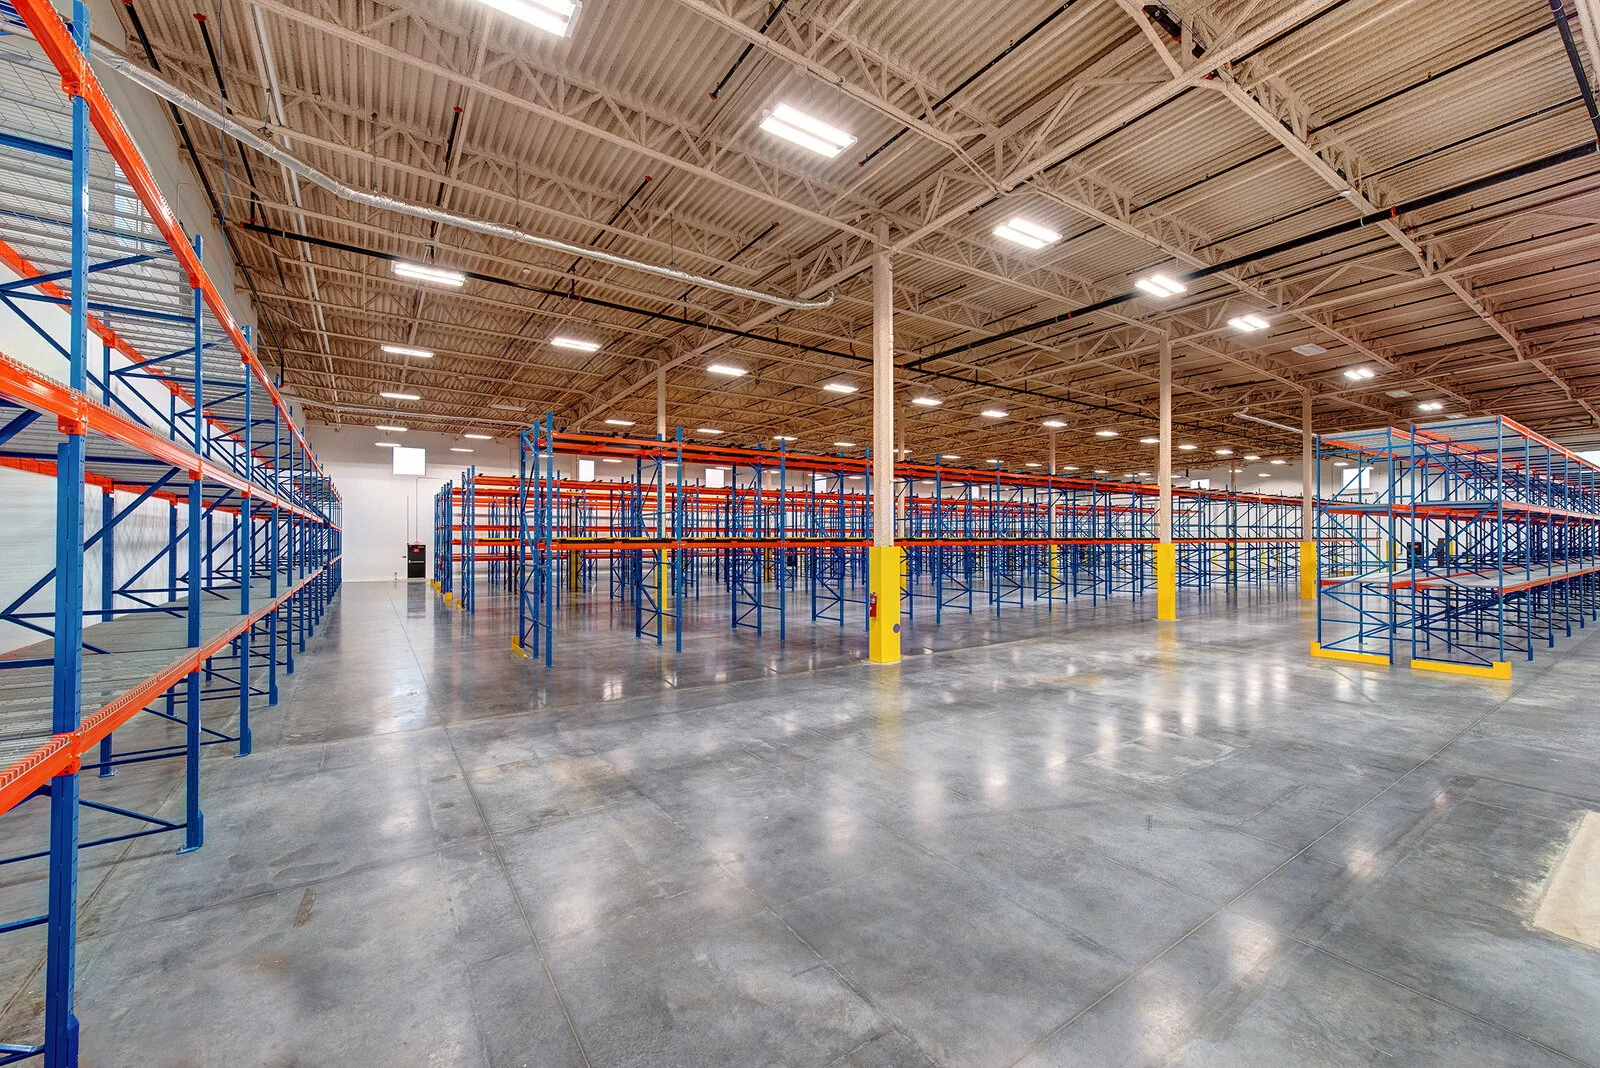 Interior Warehouse building, concrete floor, vast space, many rows of industrial shelving.